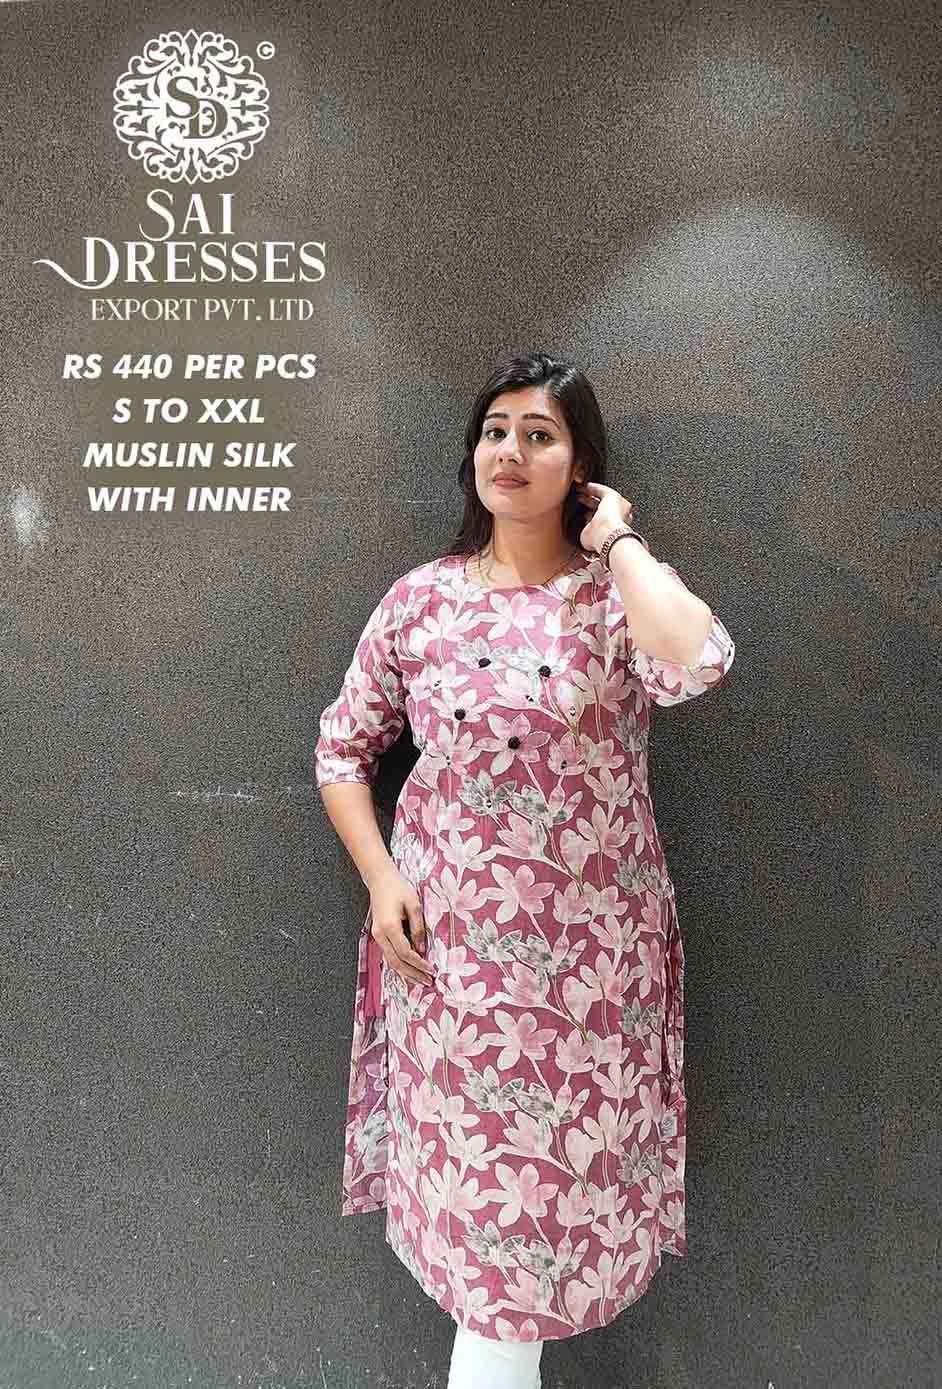 SAI DRESSES PRESENT D.NO SD56 READY TO WEAR DIGITAL PRINTED KURTI COMBO COLLECTION IN WHOLESALE RATE IN SURAT